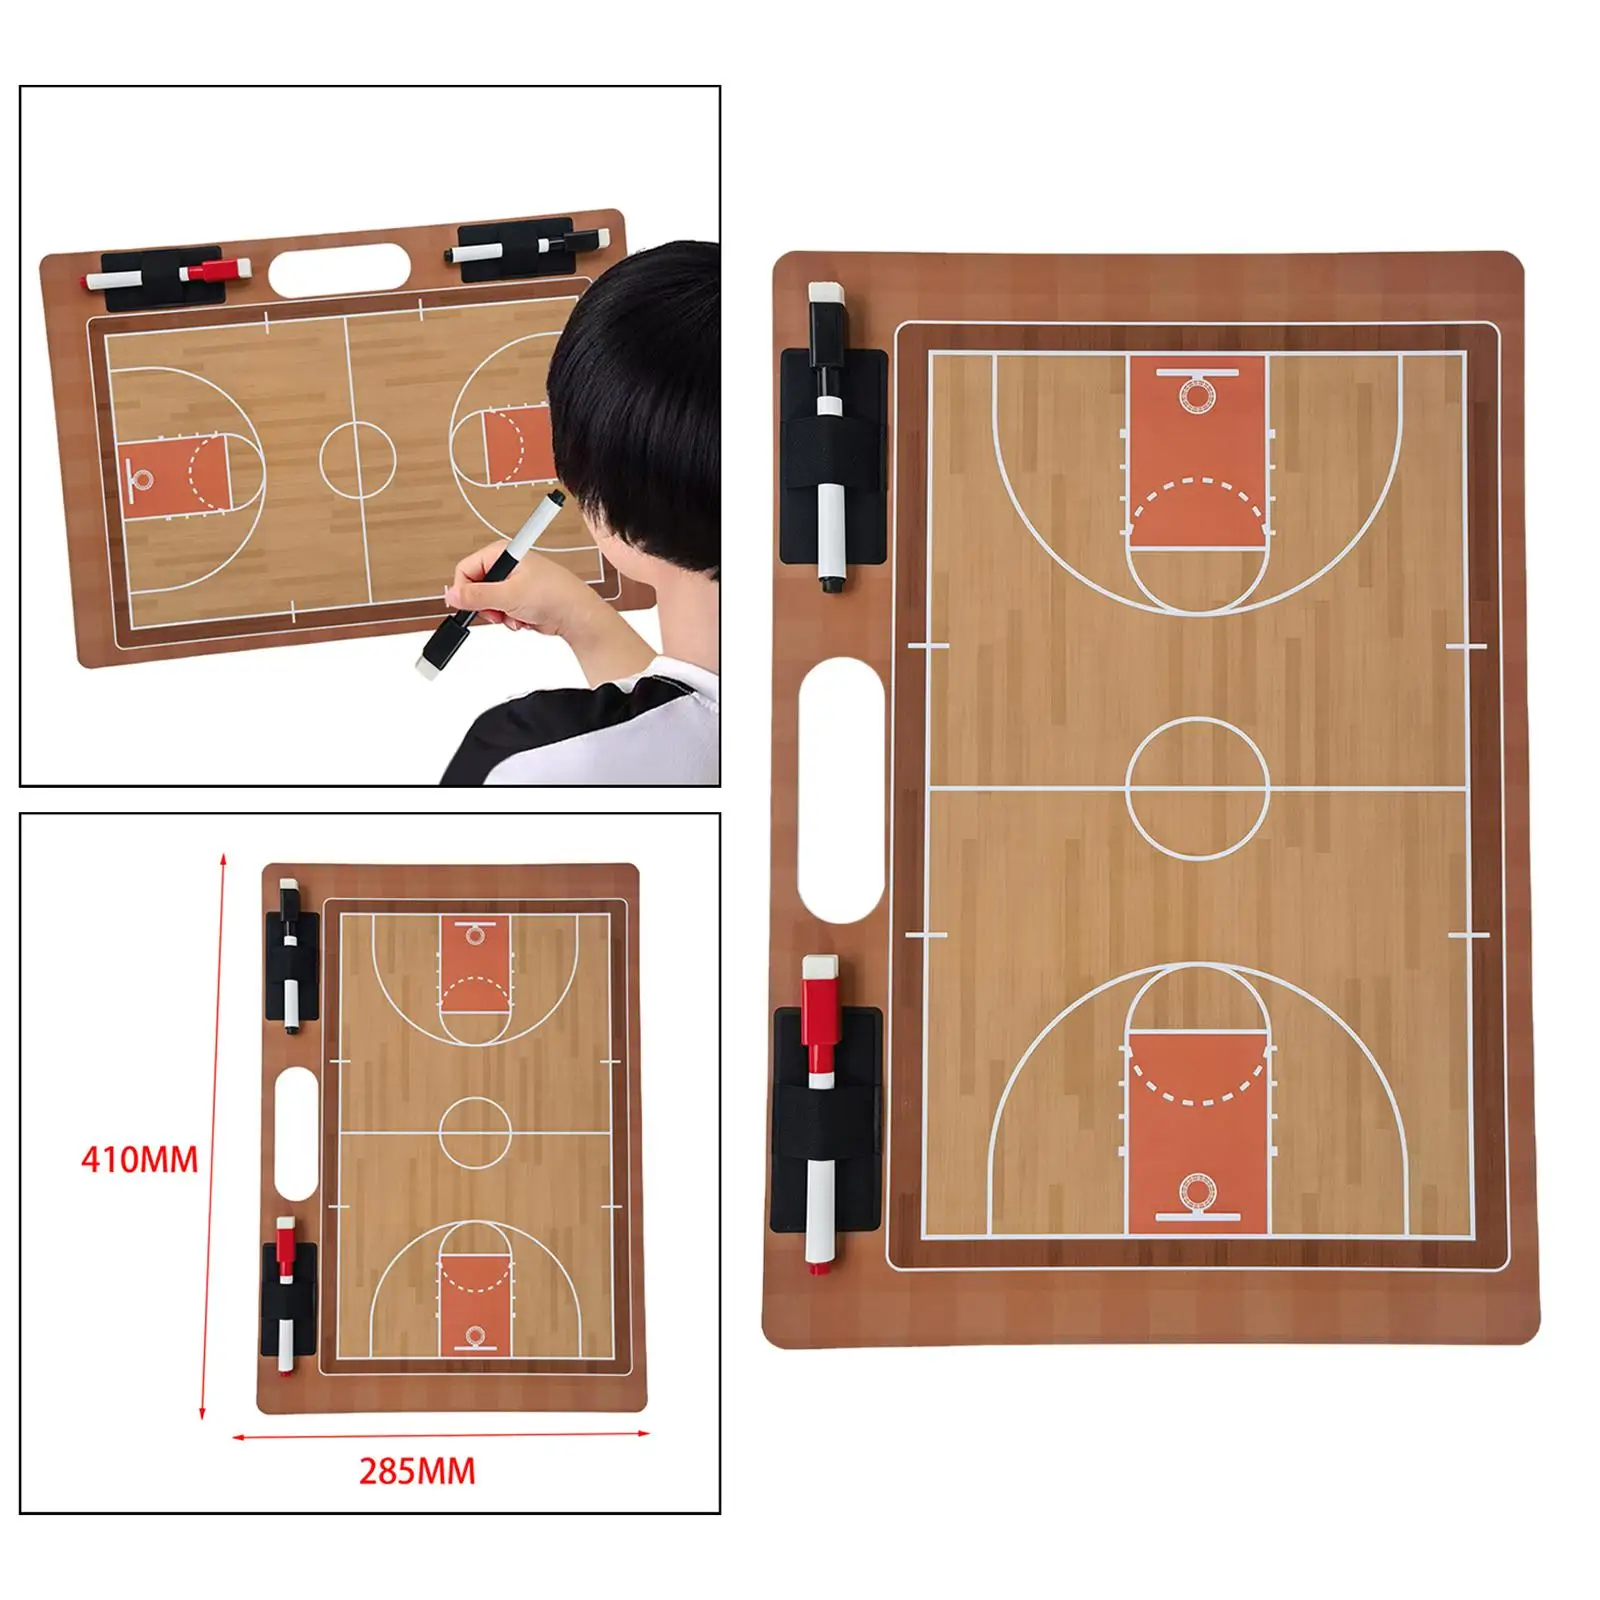 Basketball Clipboard Gift Play Board Equipment White Board Basketball Coaching Board Coaches Boards Dry Erase for Practice Coach